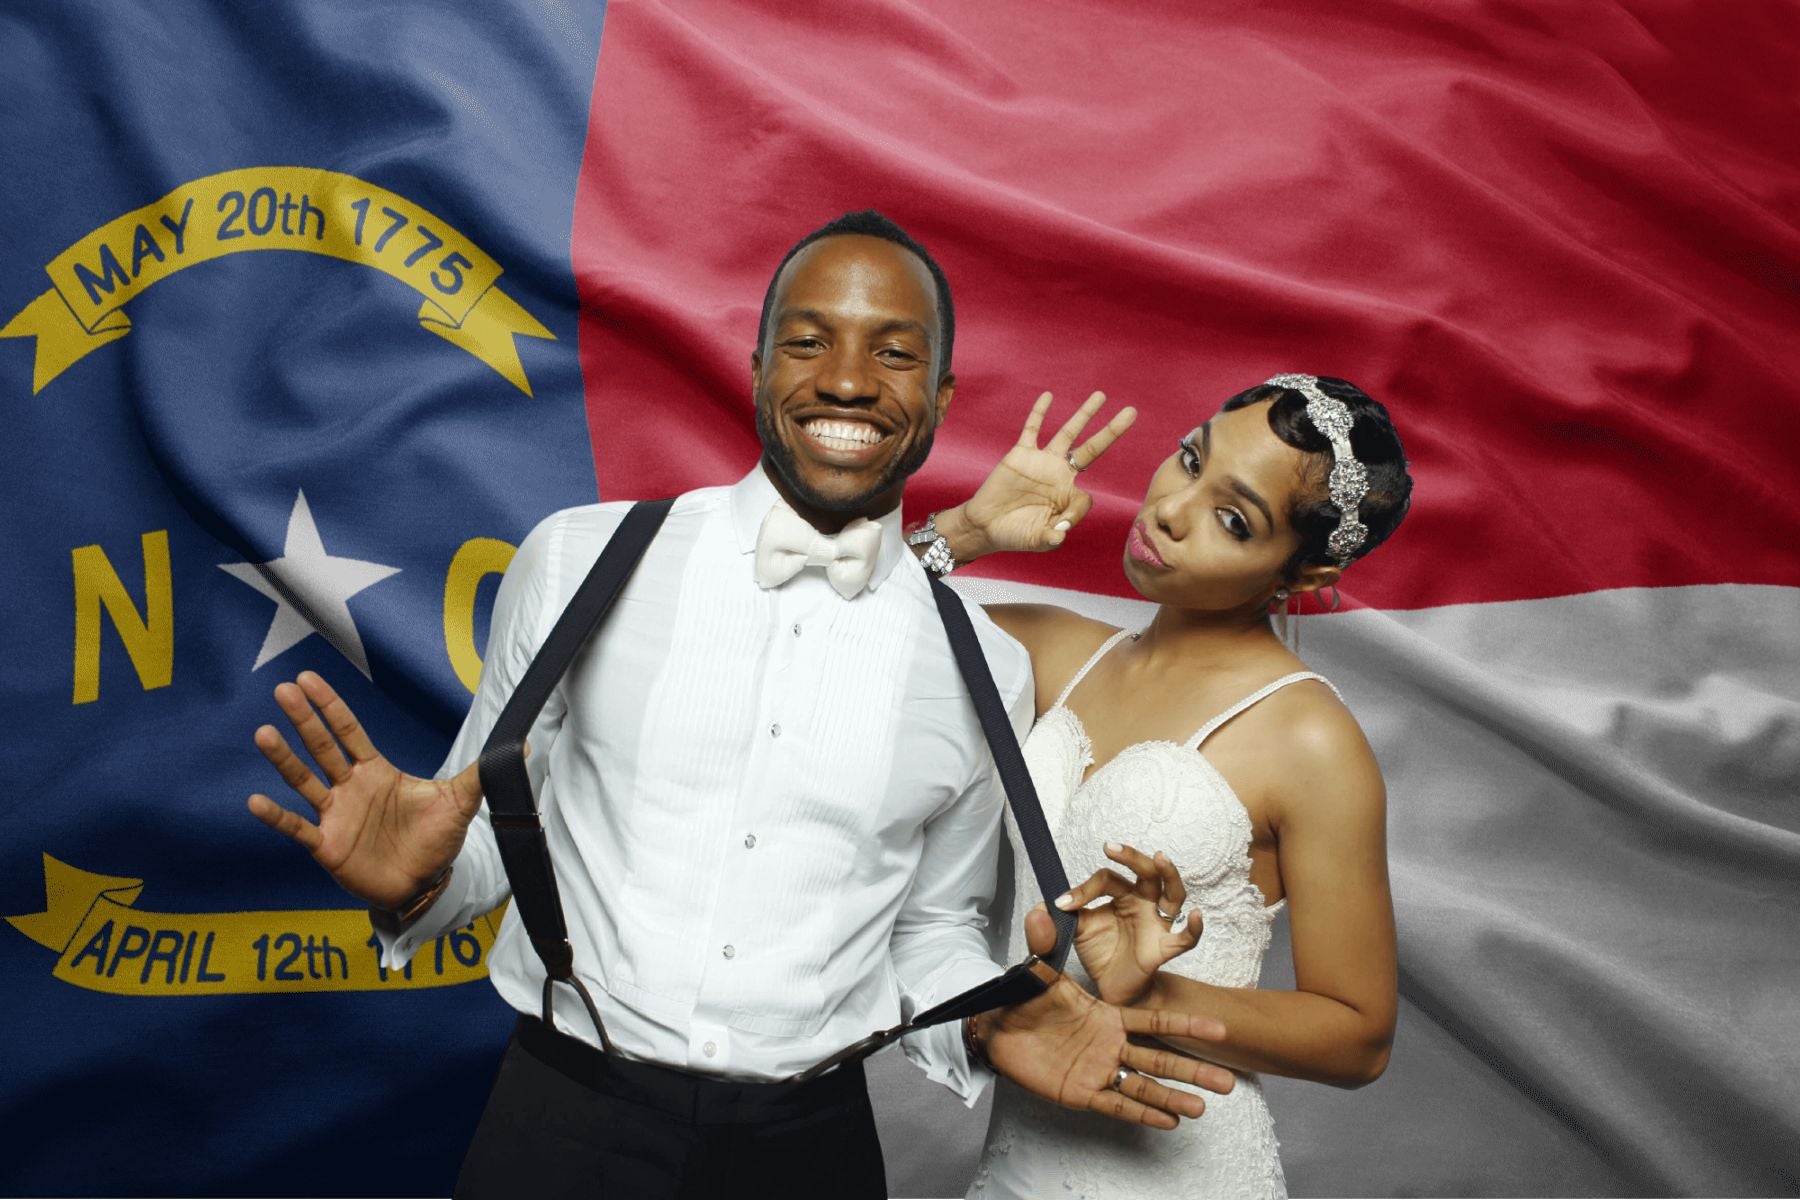 Photo Booth Rentals in Greensboro, NC